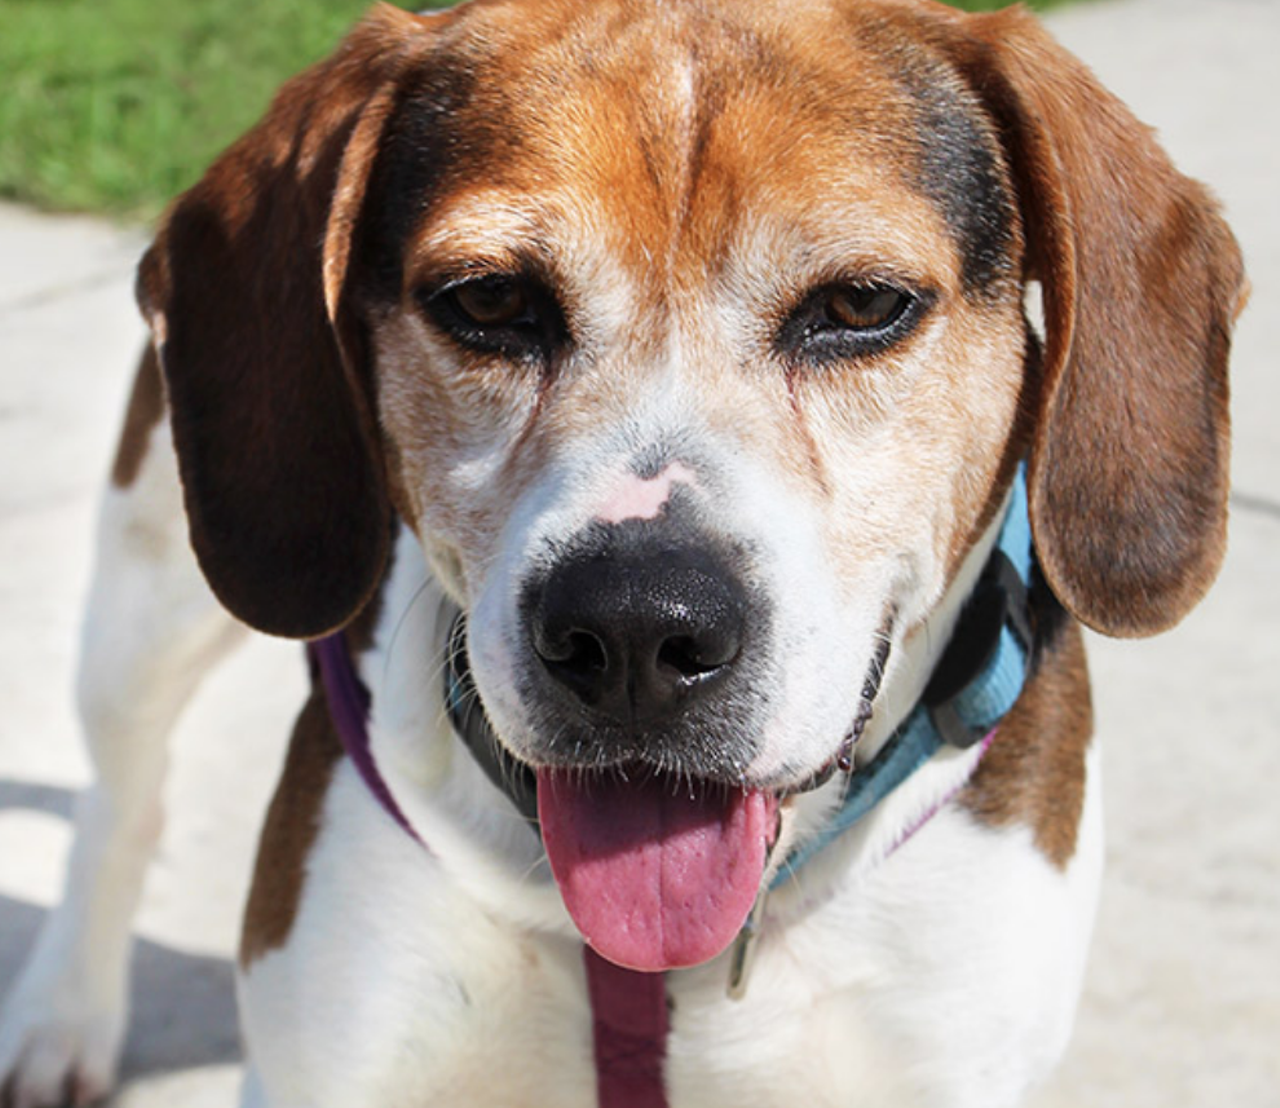 Chowder
"Oh hi there! I’m the handsome Chowder! You know what I really enjoy? Going outside for walks! I love to sniff, sniff, sniff everything while I’m out exploring. Oh and I absolutely love getting all the attention! Let’s meet soon so that you can see what a friendly cool dude I am."